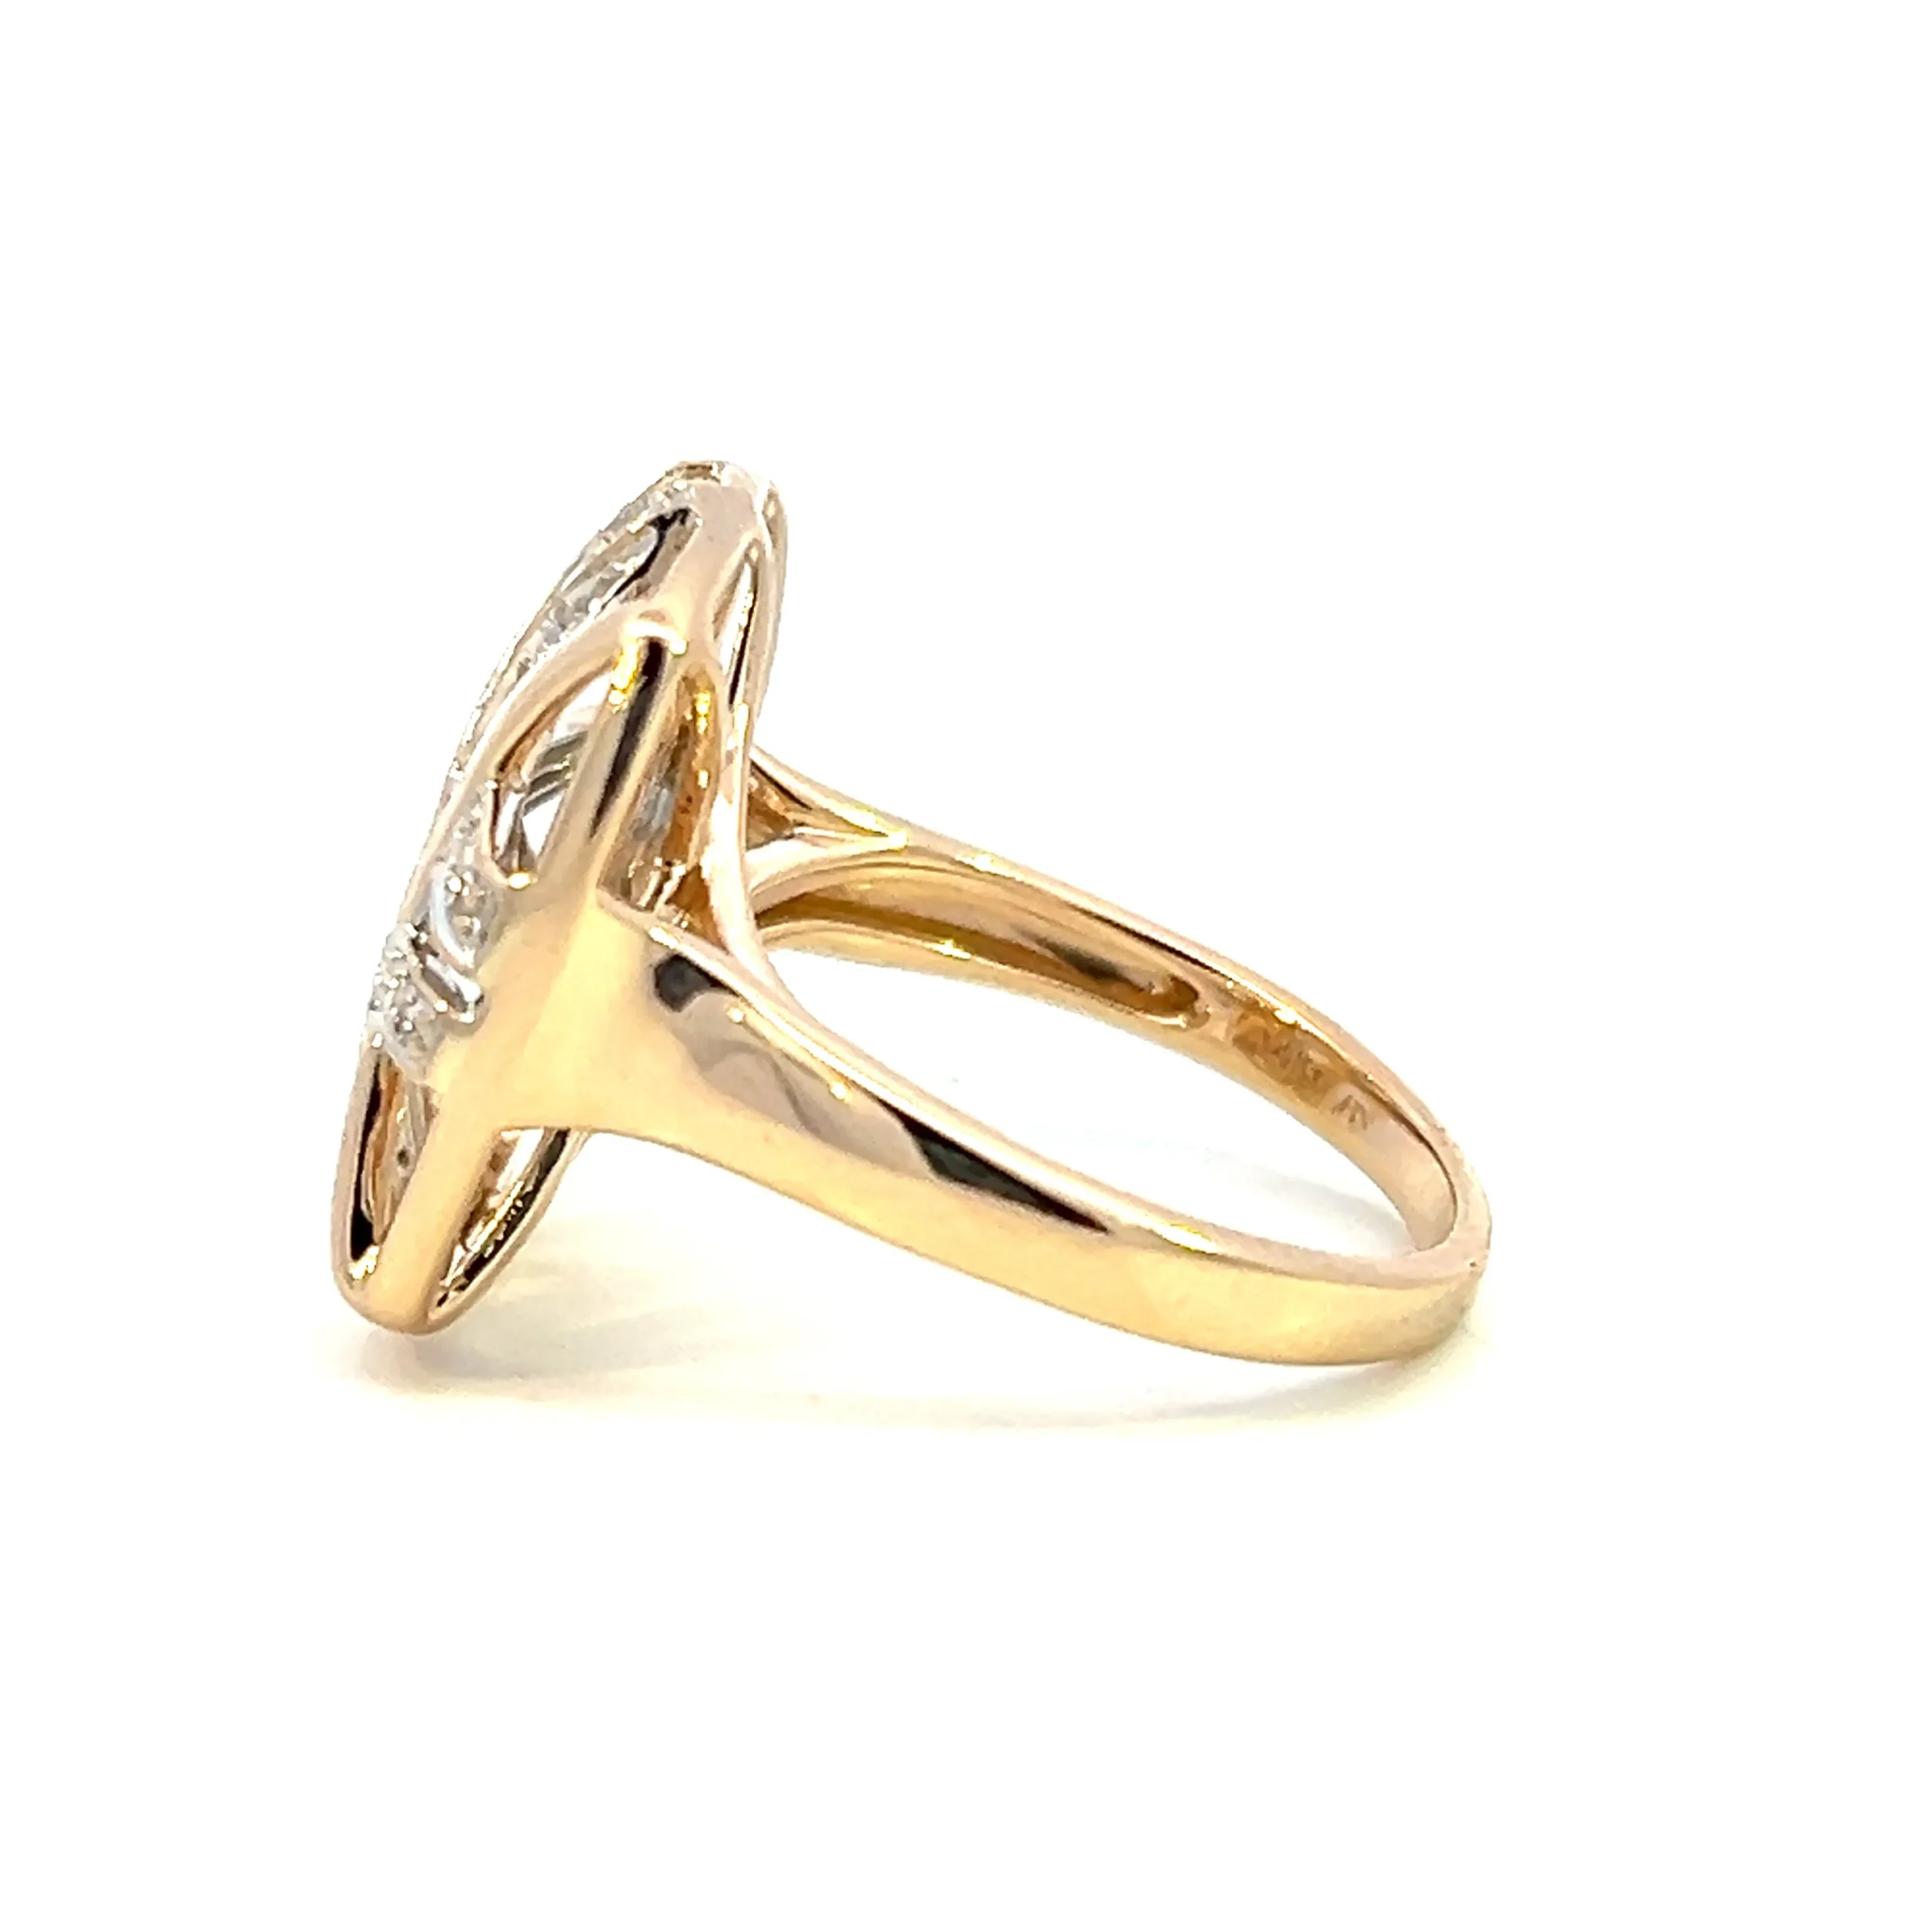 One estate 14 karat yellow gold open cushion shaped ring with overlapping wire designs set with 29 round brillant diamonds weighing 0.33 total carat weight. Four wire strands are set with diamonds while 2 are polished.